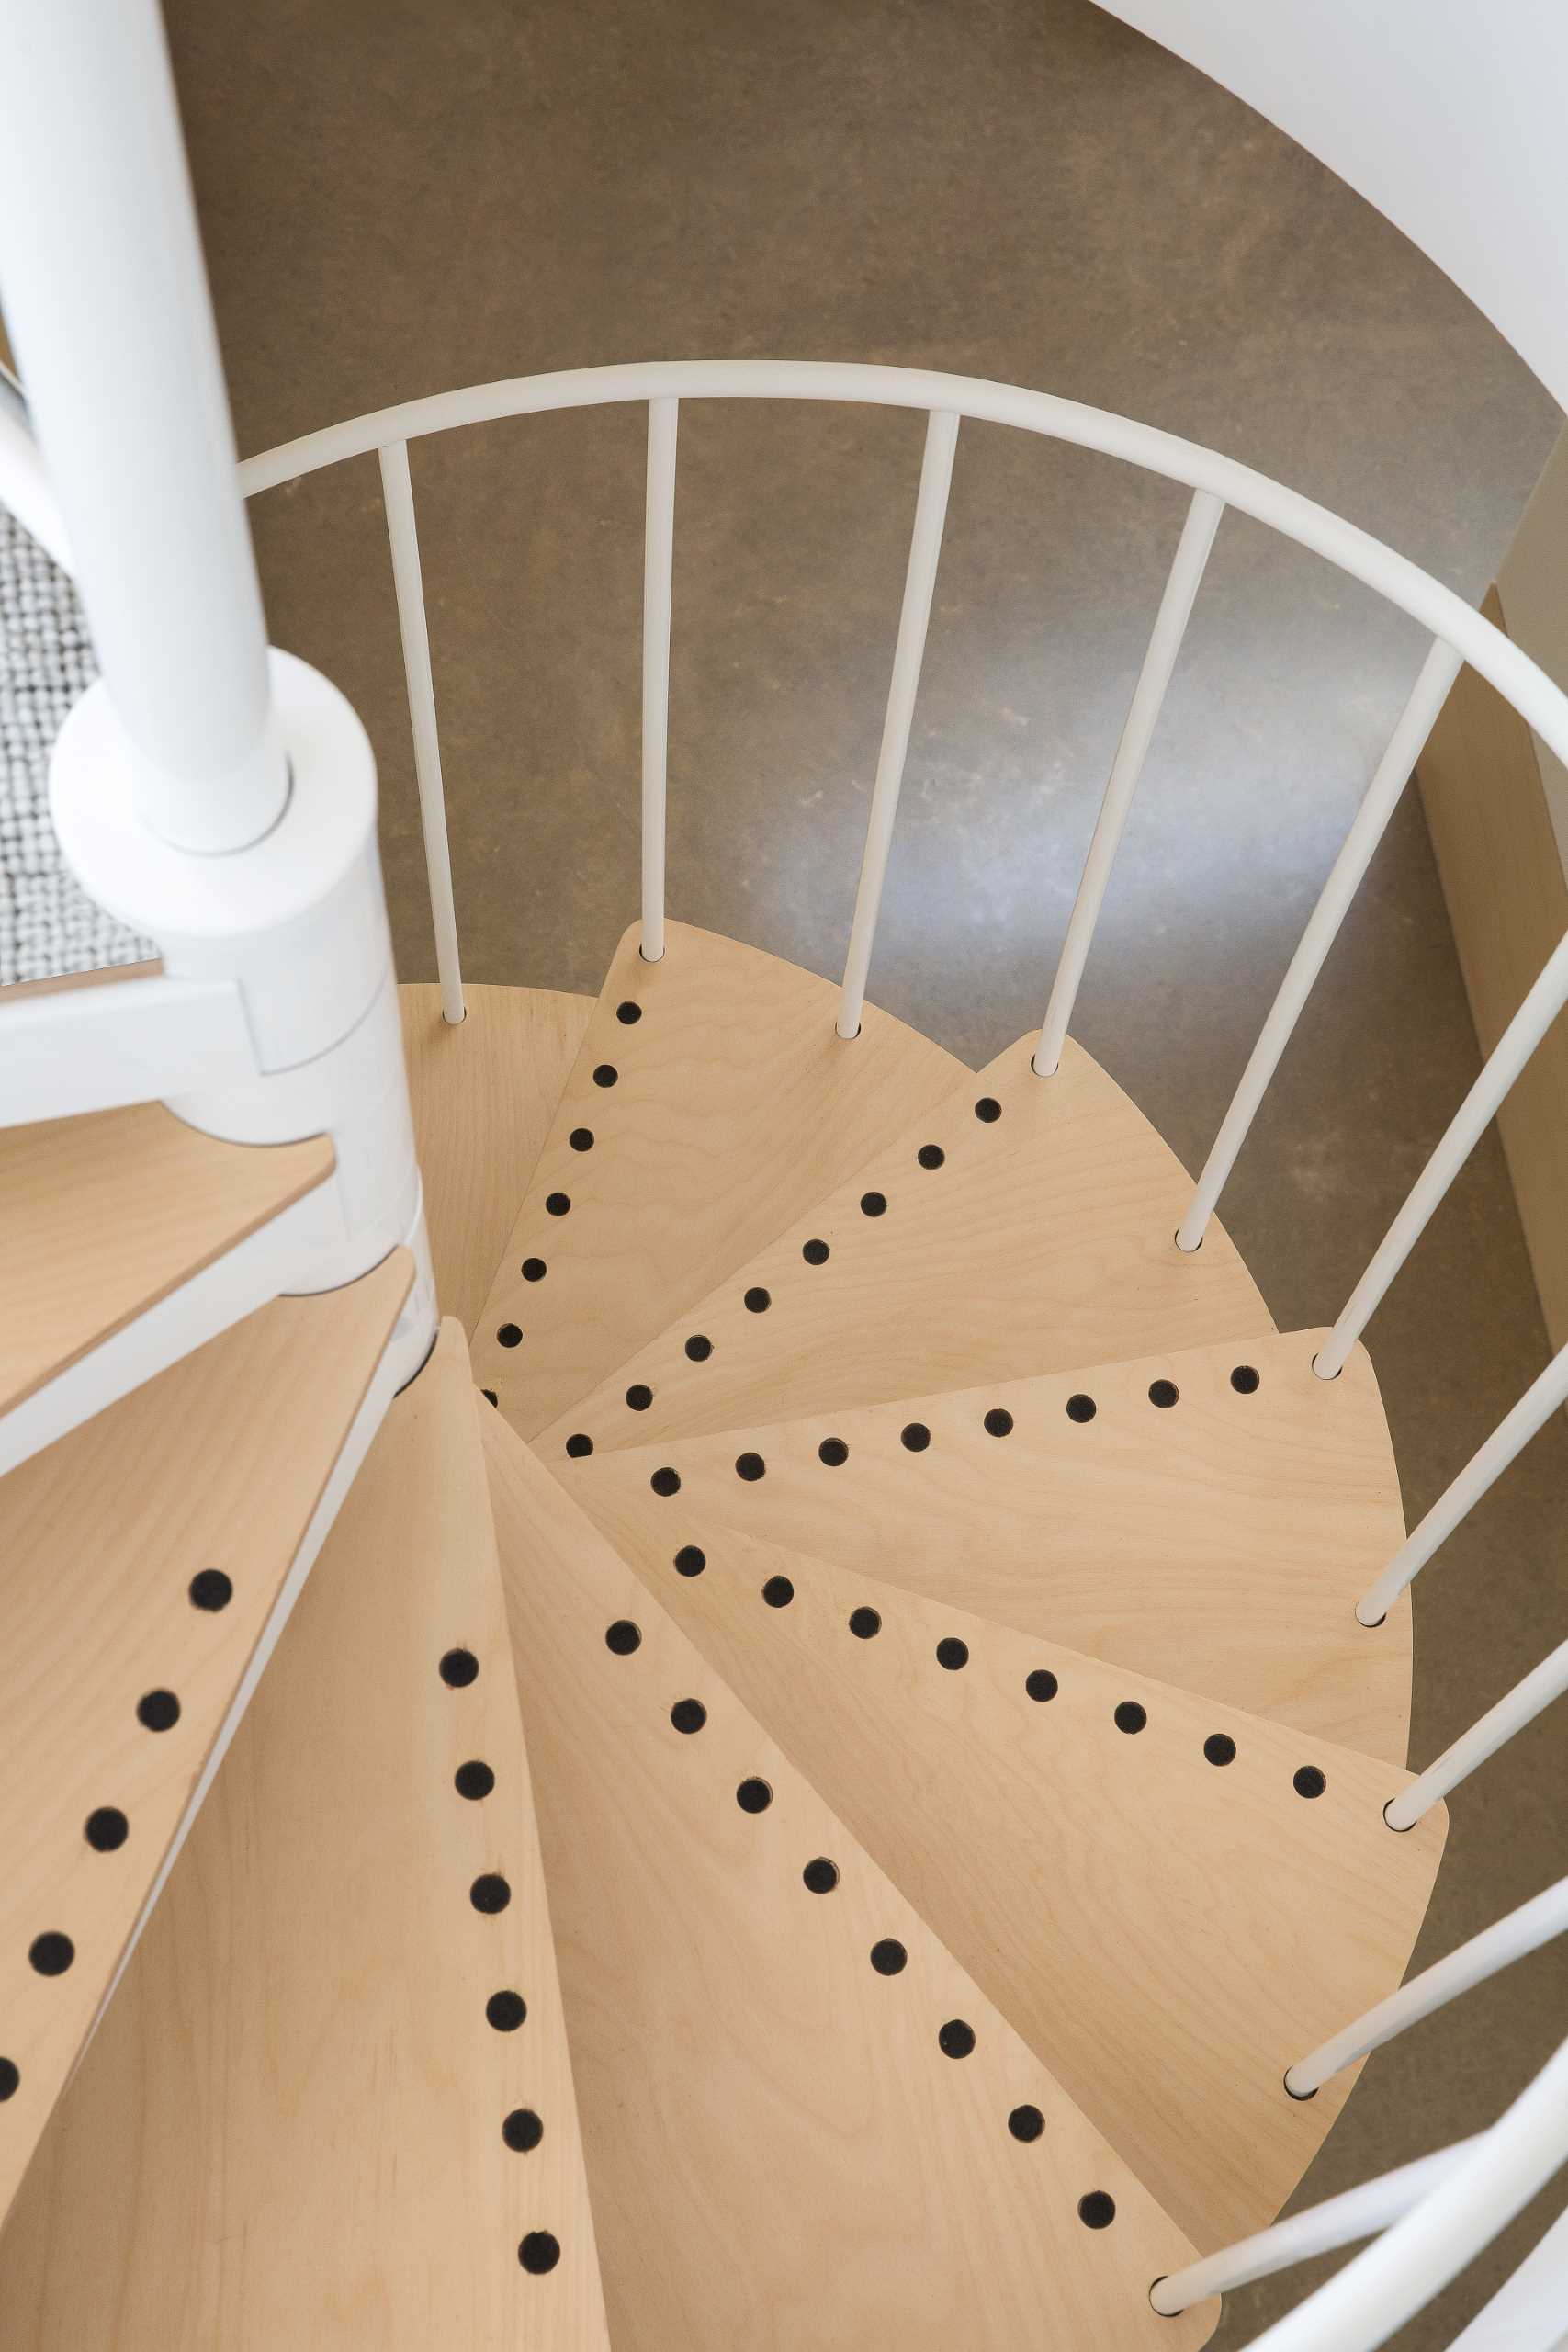 Spiral stairs with a white railing and wood treads lead from the main floor of the home to the upstairs mezzanine level.